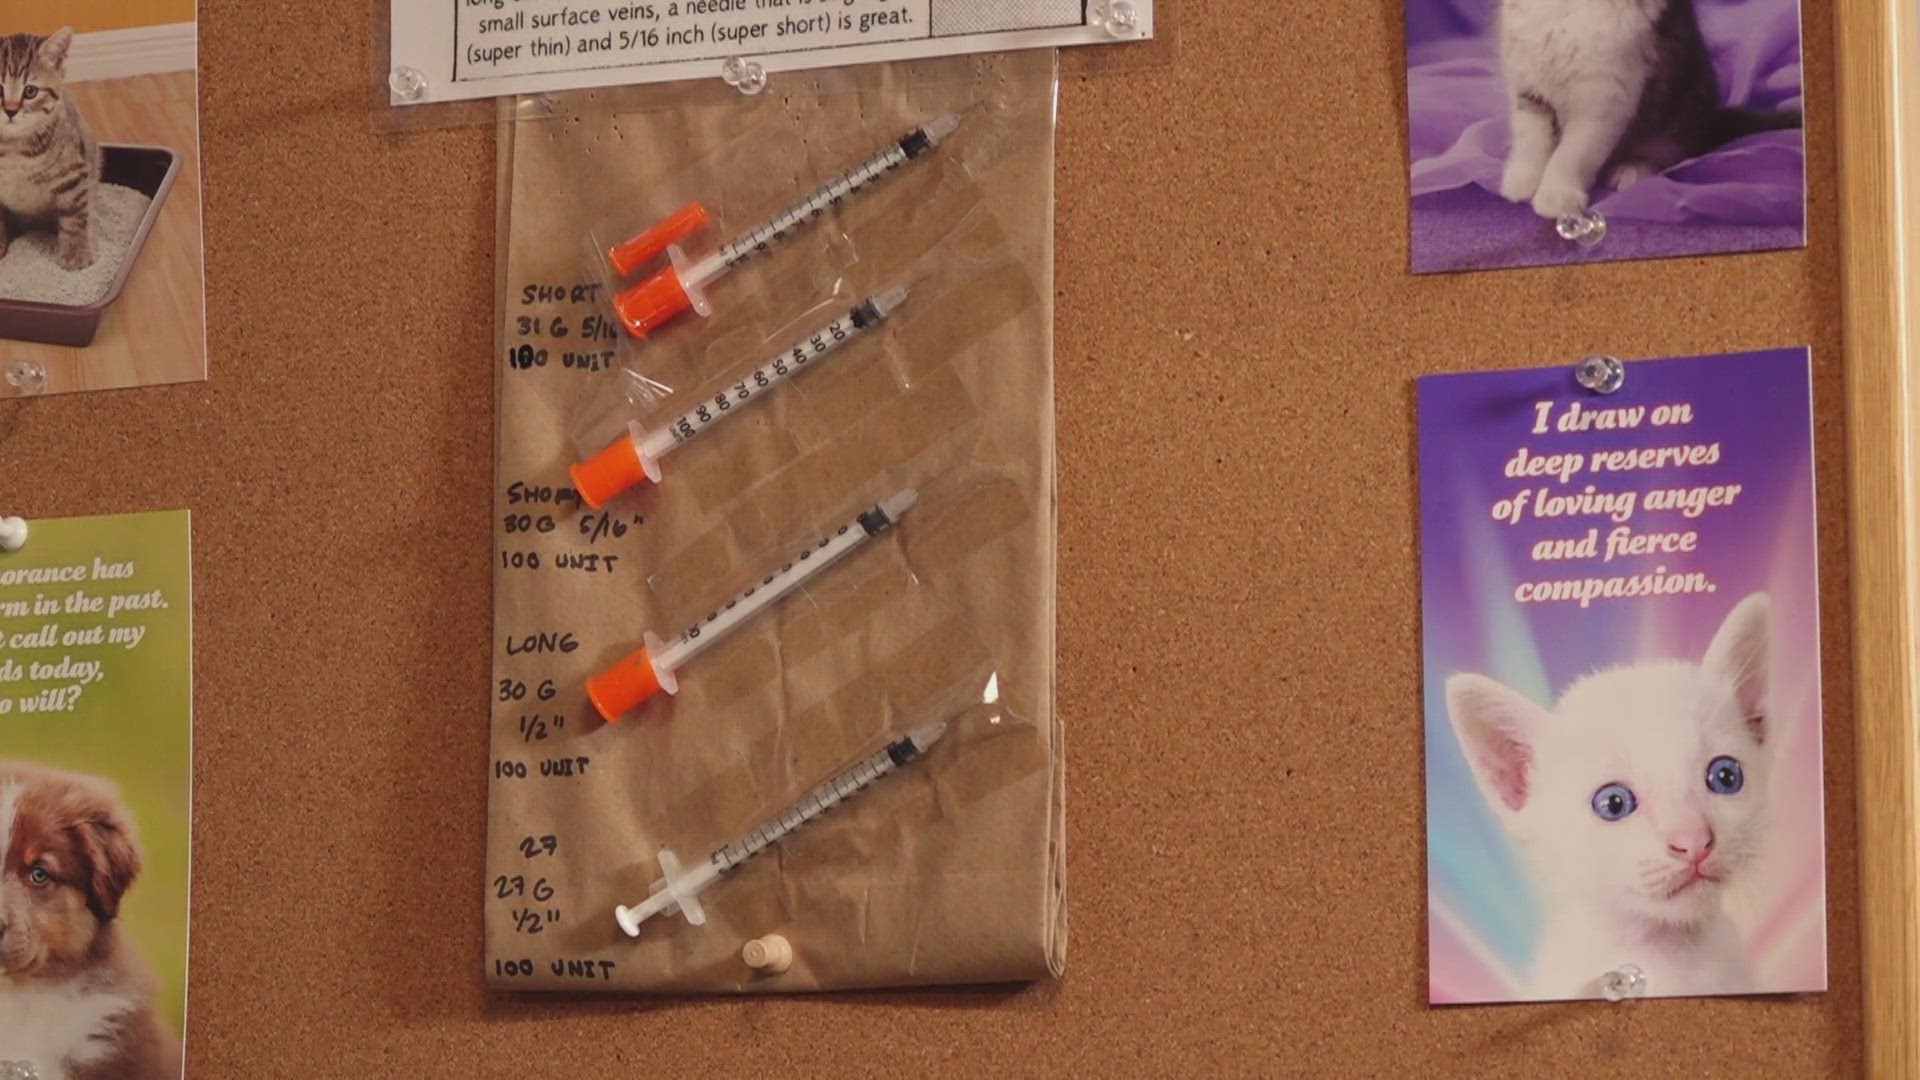 With a syringe service program, those struggling with addiction can trade out their dirty needles for clean ones.